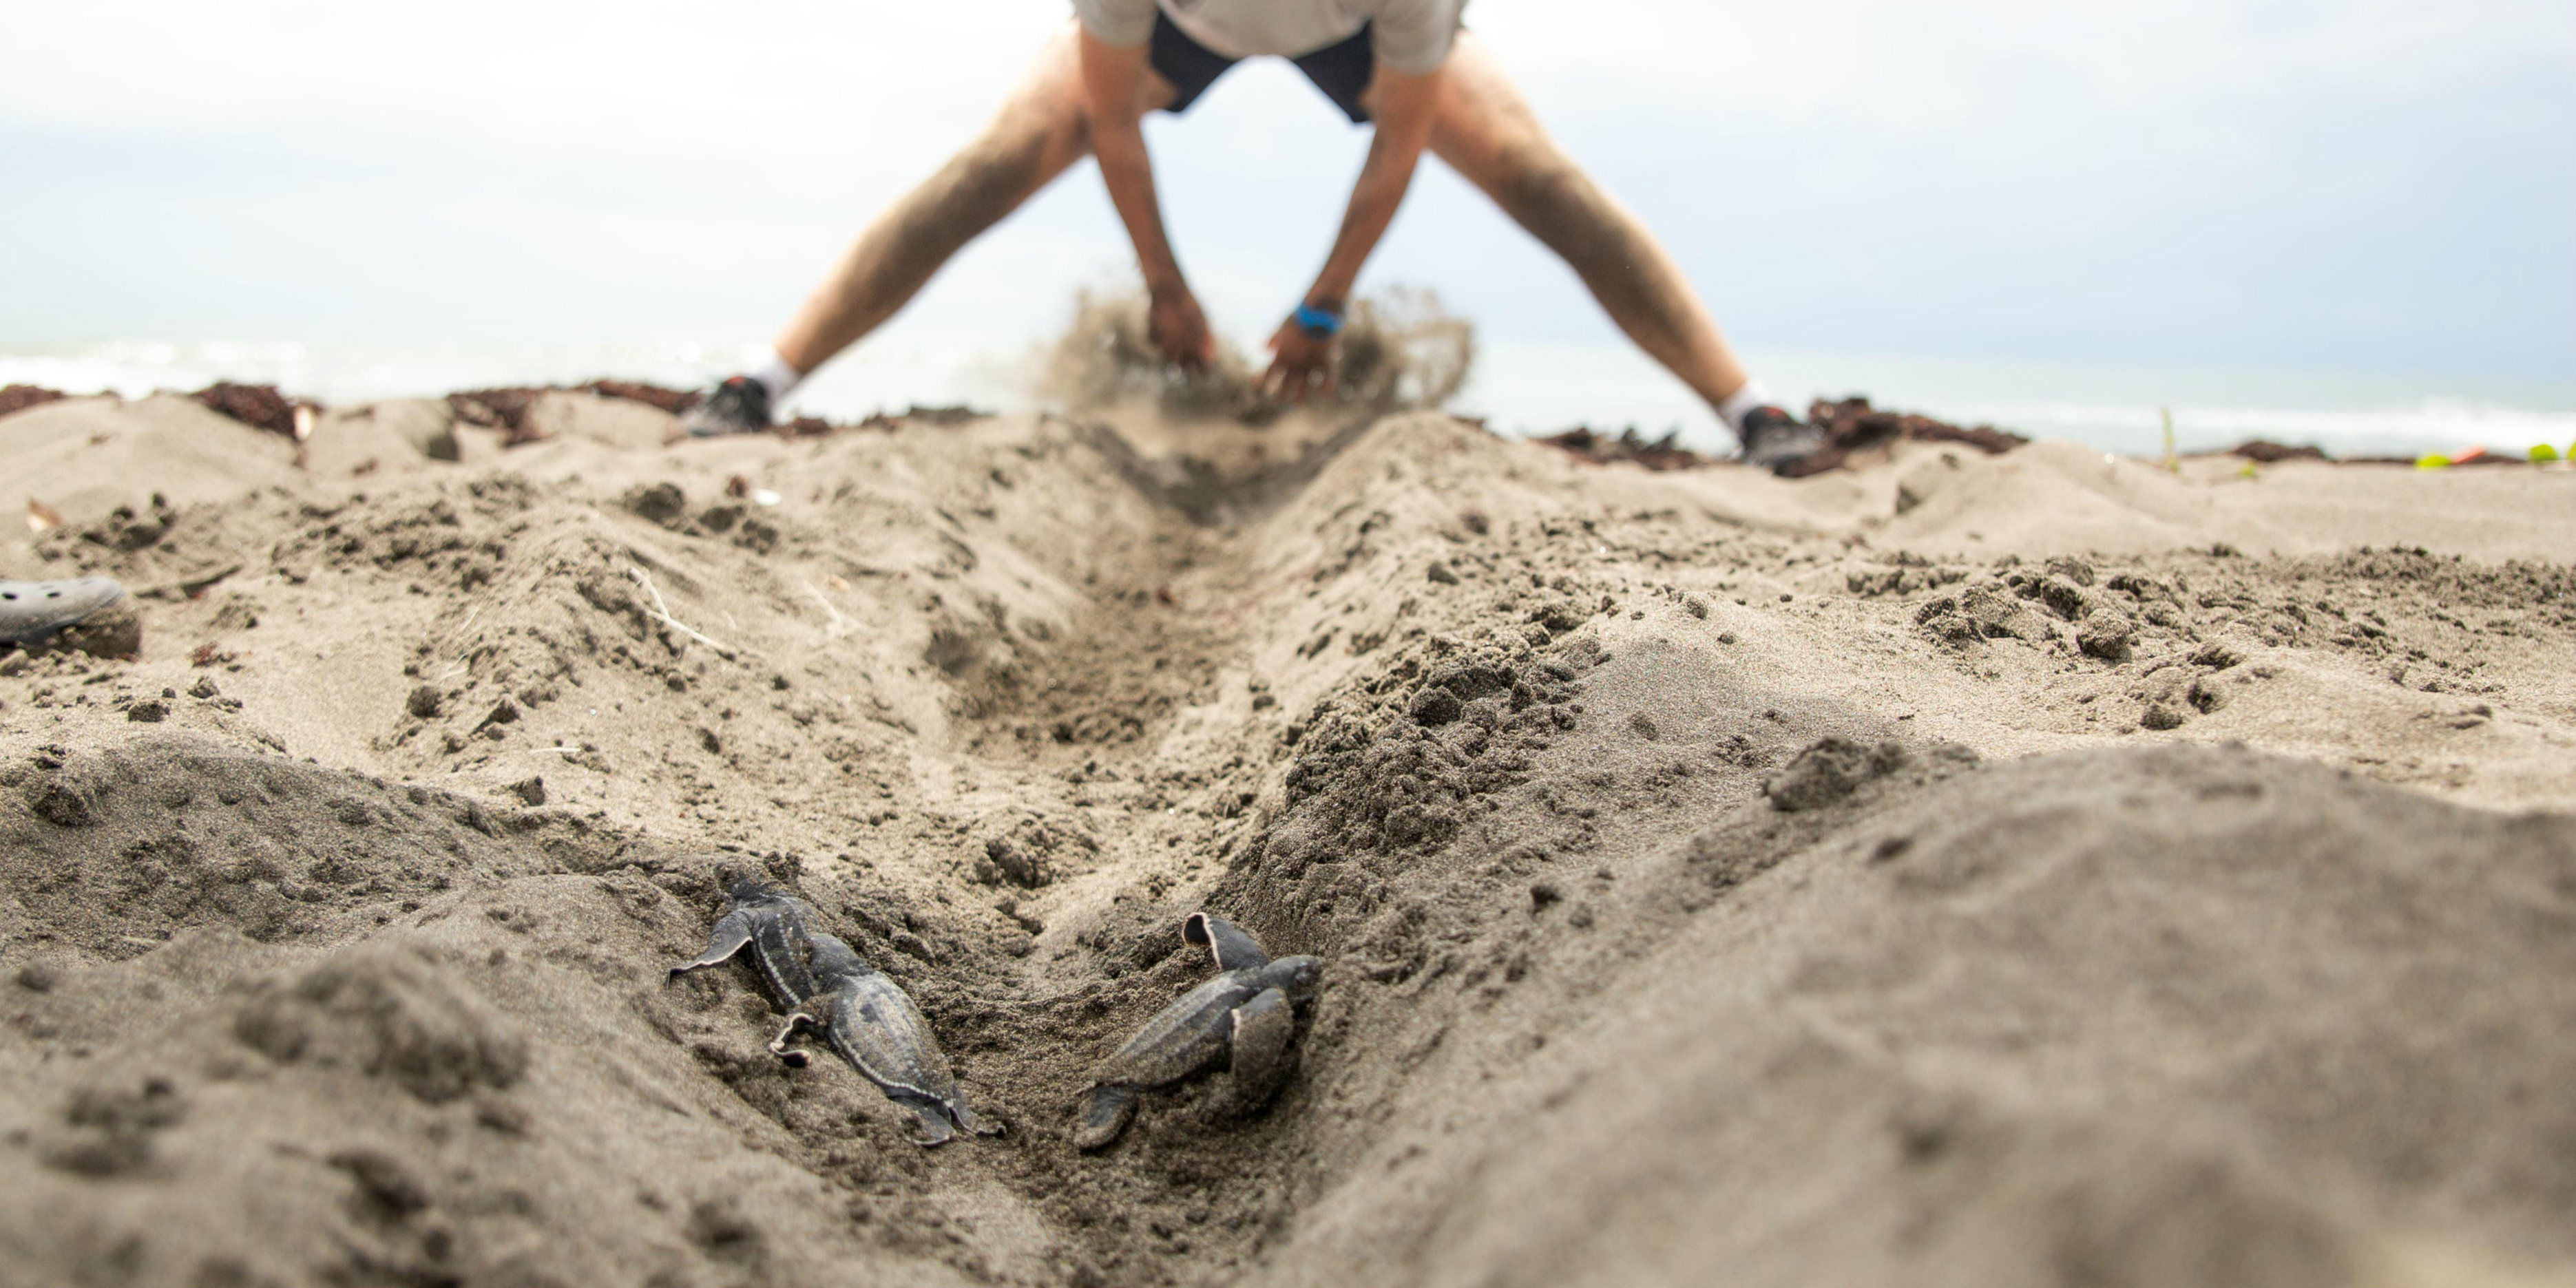 While volunteering with Costa Rica sea turtles, a GVI volunteer digs out a trench to help sea turtles hatchings make it to the water safely.